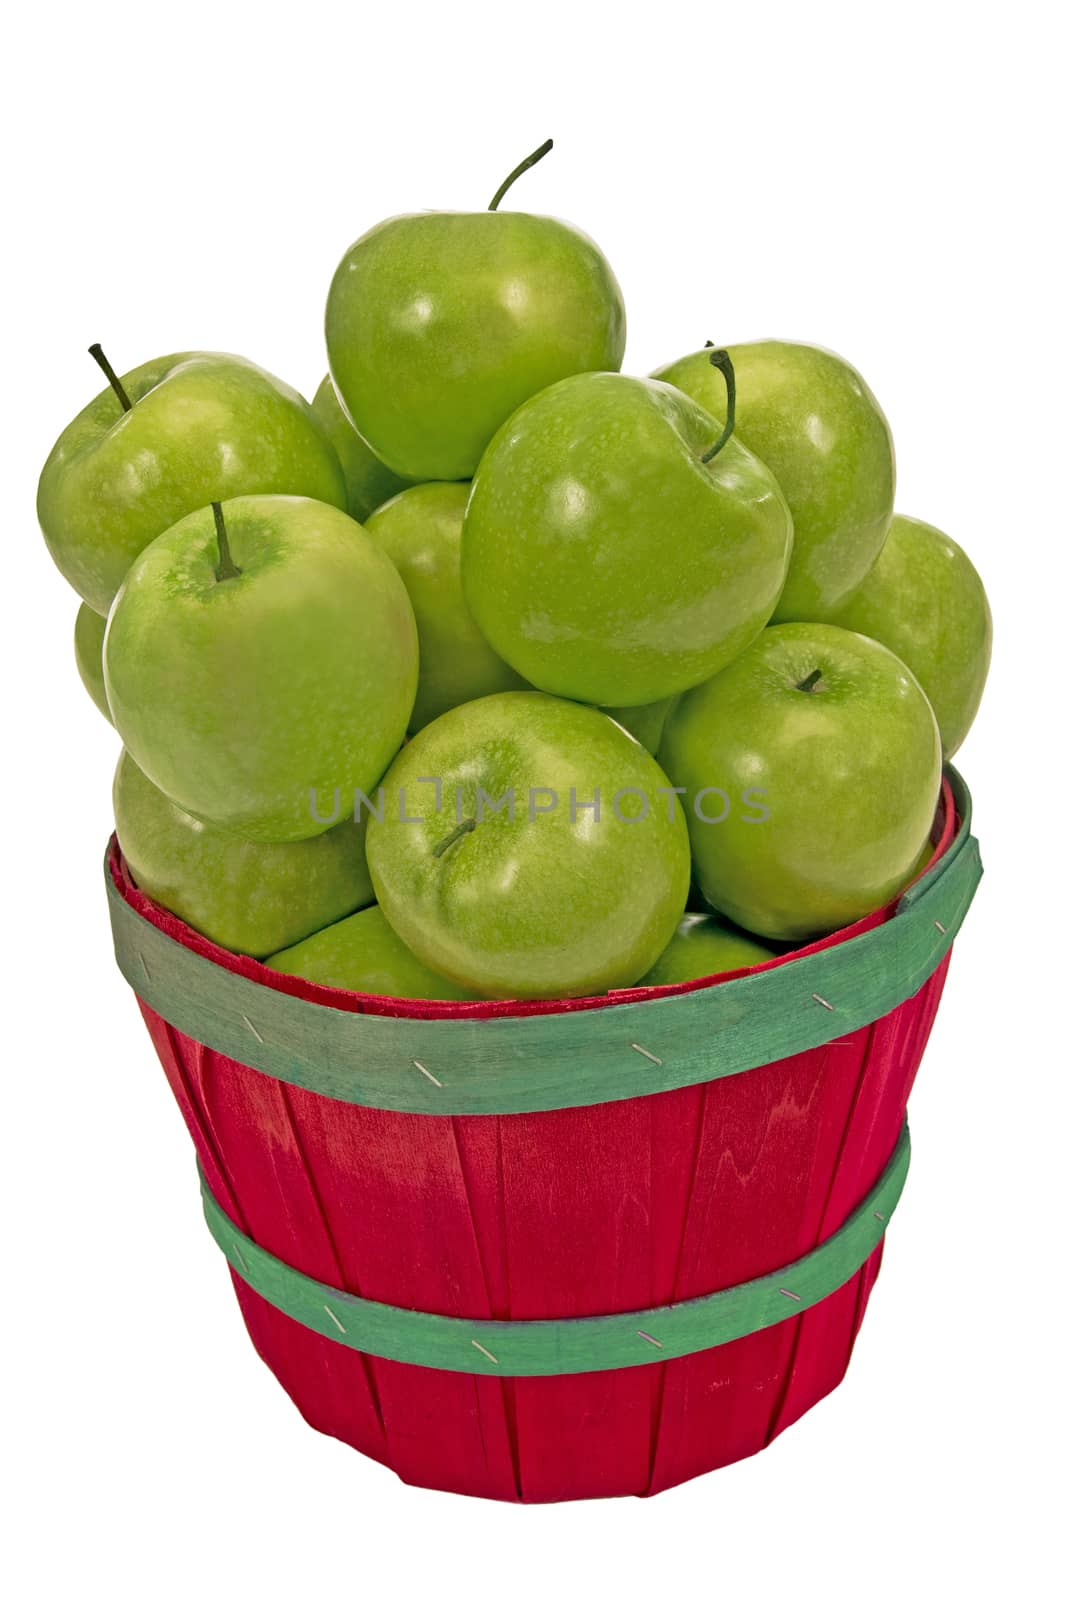 Small Bushel Of Green Apples by stockbuster1